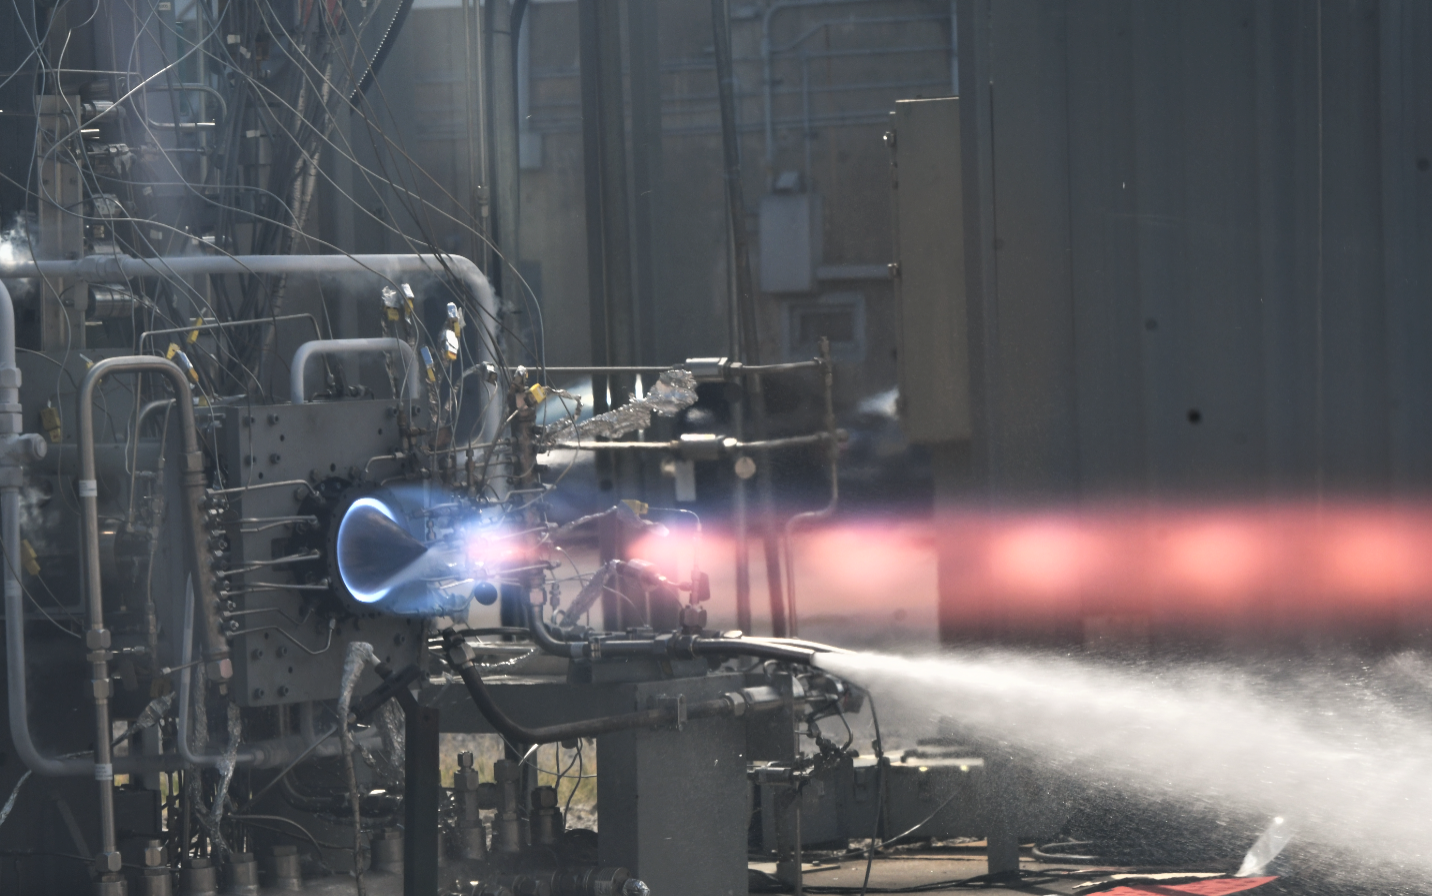 Rotating detonation rocket engine, or RDRE hot fire test at Marshall Space Flight Center. On a metal test stand, the engine appears to have a ring of blue light at the base, and the flames turn redish orange as they are ejected from the rocket engine.